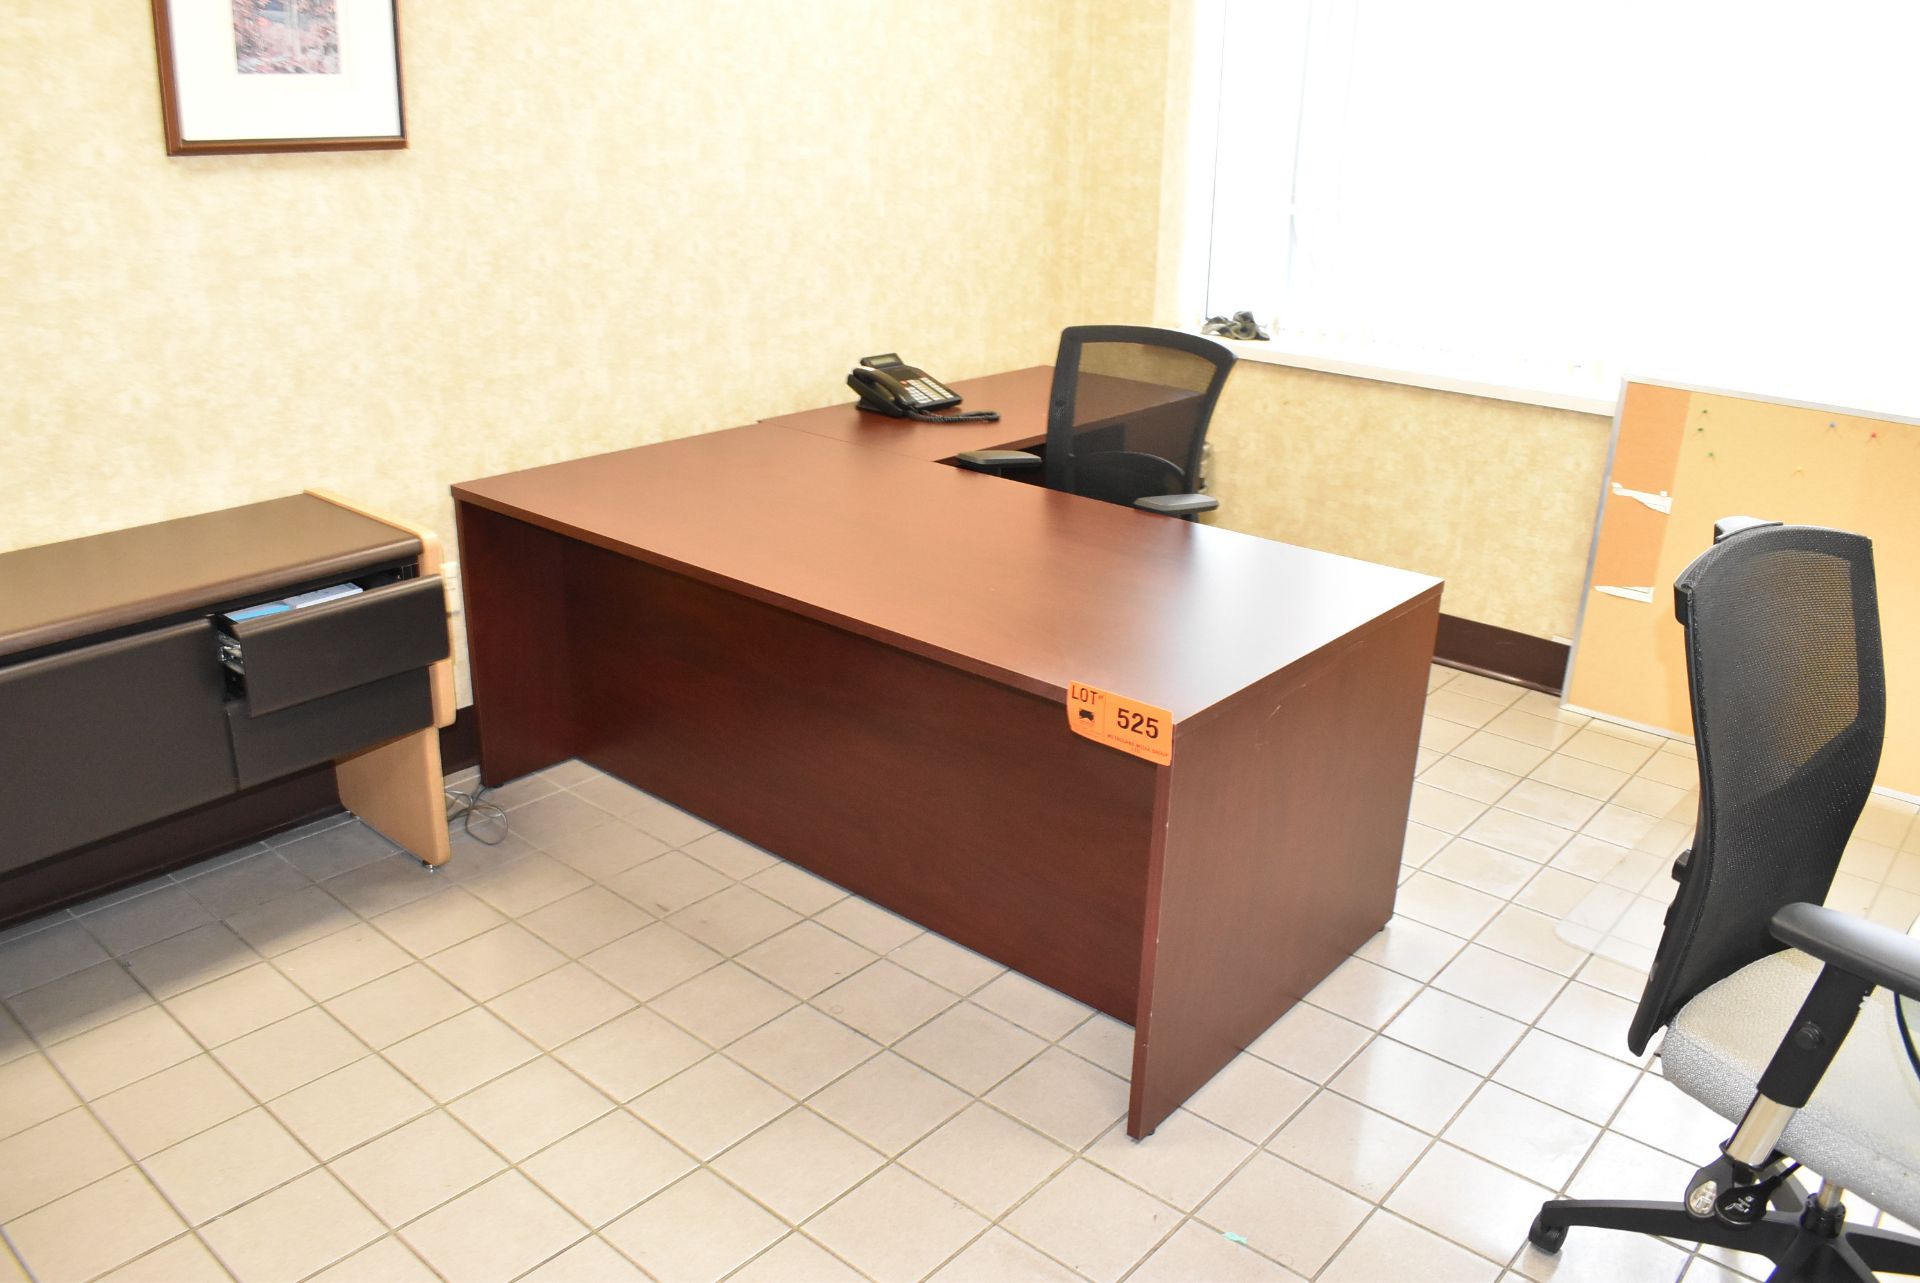 LOT/ CONTENTS OF OFFICE CONSISTING OF DESK WITH OFFICE CHAIR, COUCH, CREDENZA, ROUND GLASS-TOP TABLE - Image 2 of 5